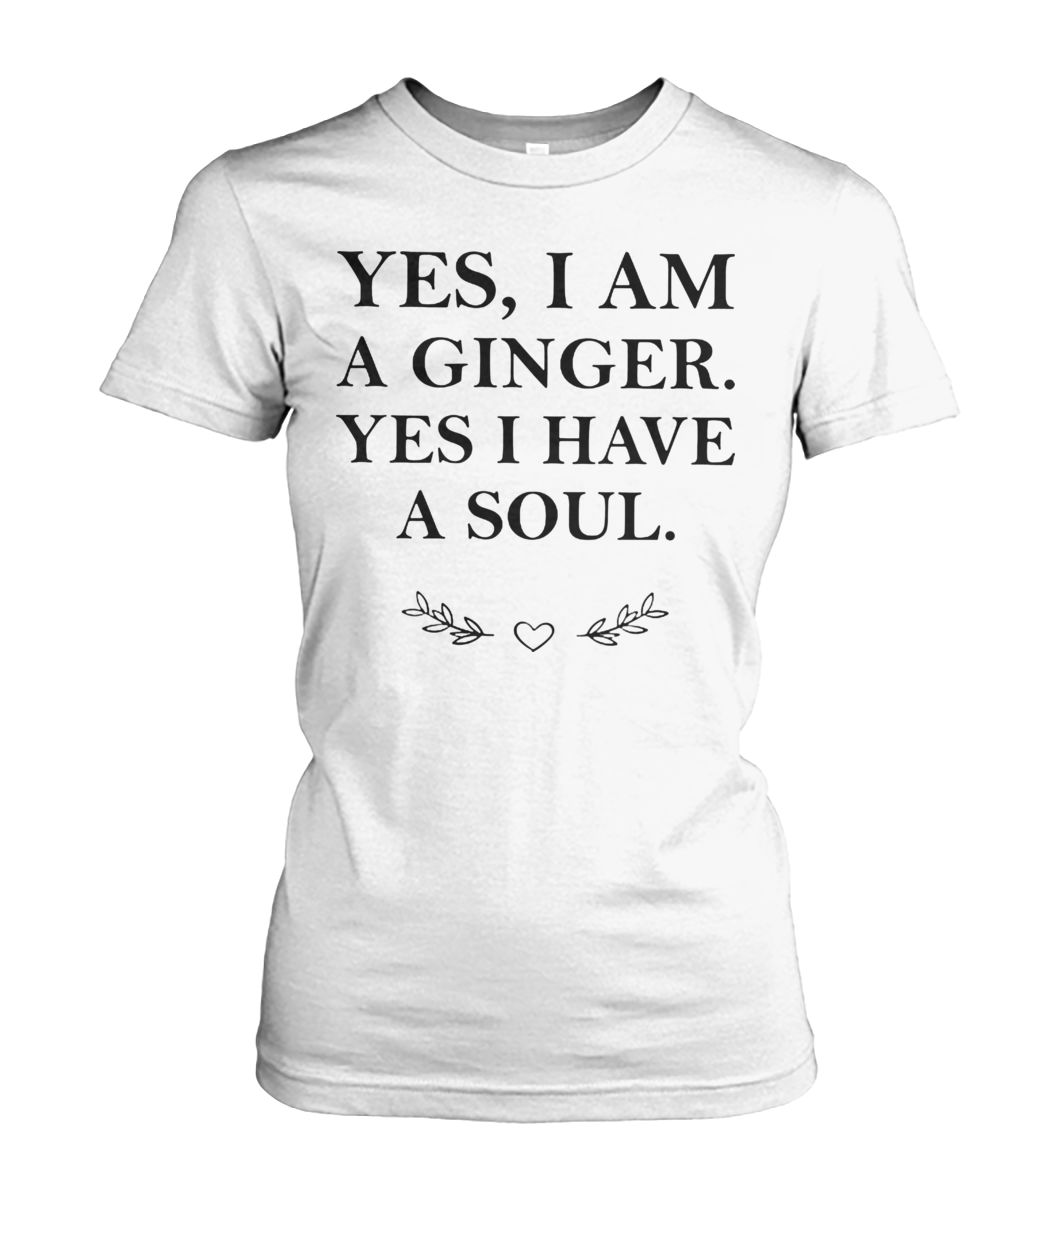 Yes I am a ginger yes I have a soul women's crew tee